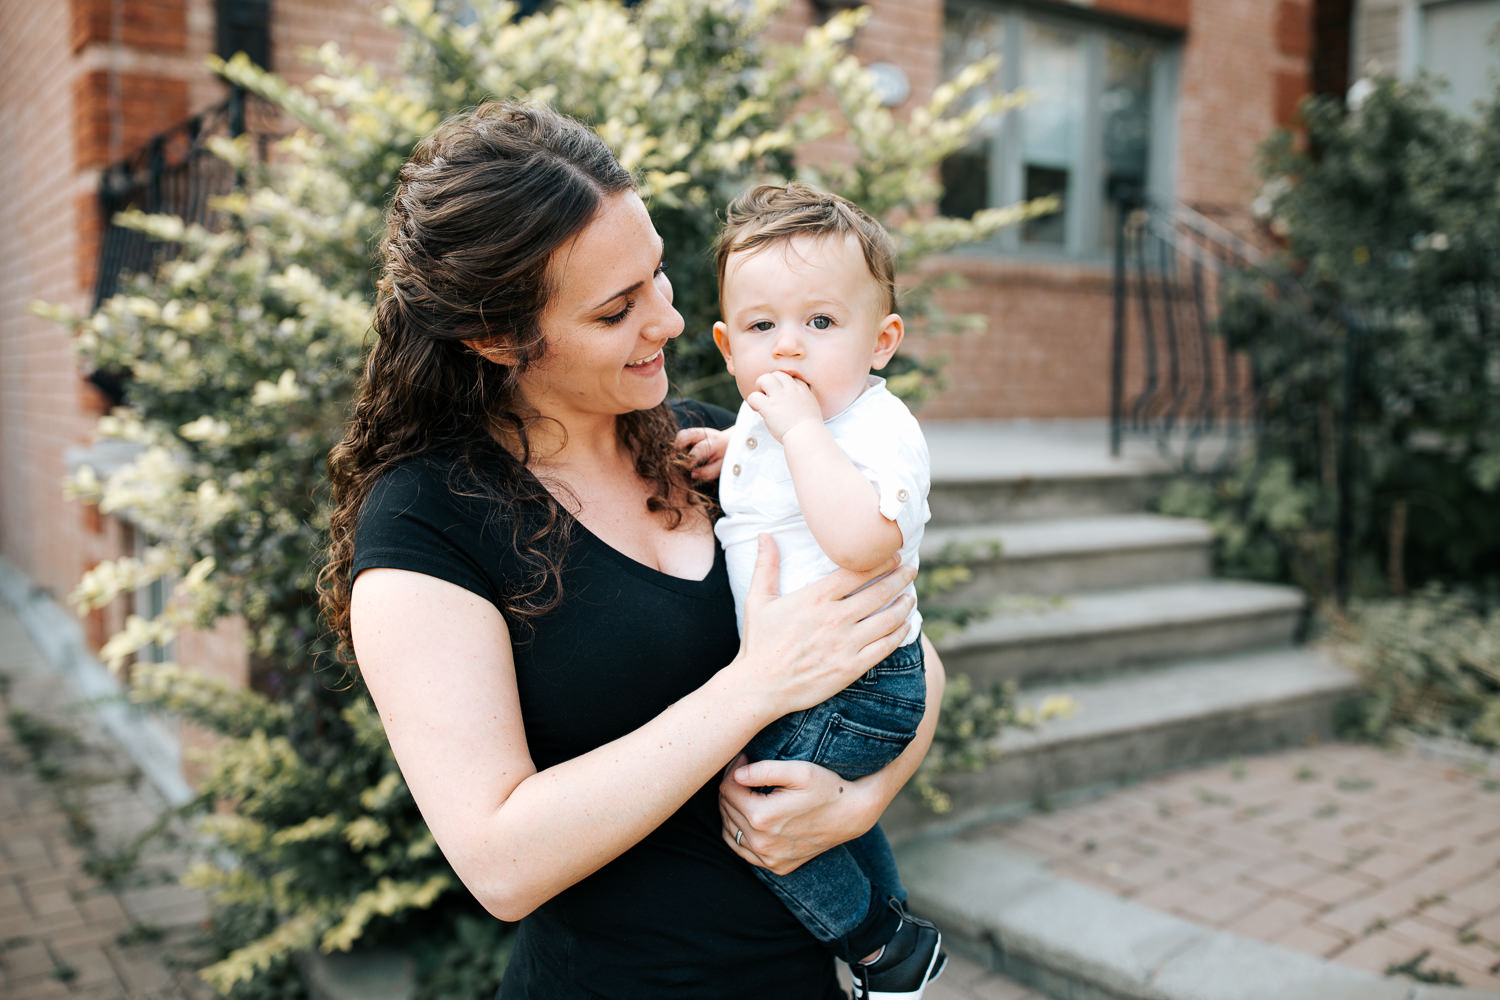 mom standing holding 9 month old baby boy with dark hair wearing white t-shirt and jeans, smiling at son, boy looking at camera - Markham Golden Hour Photos